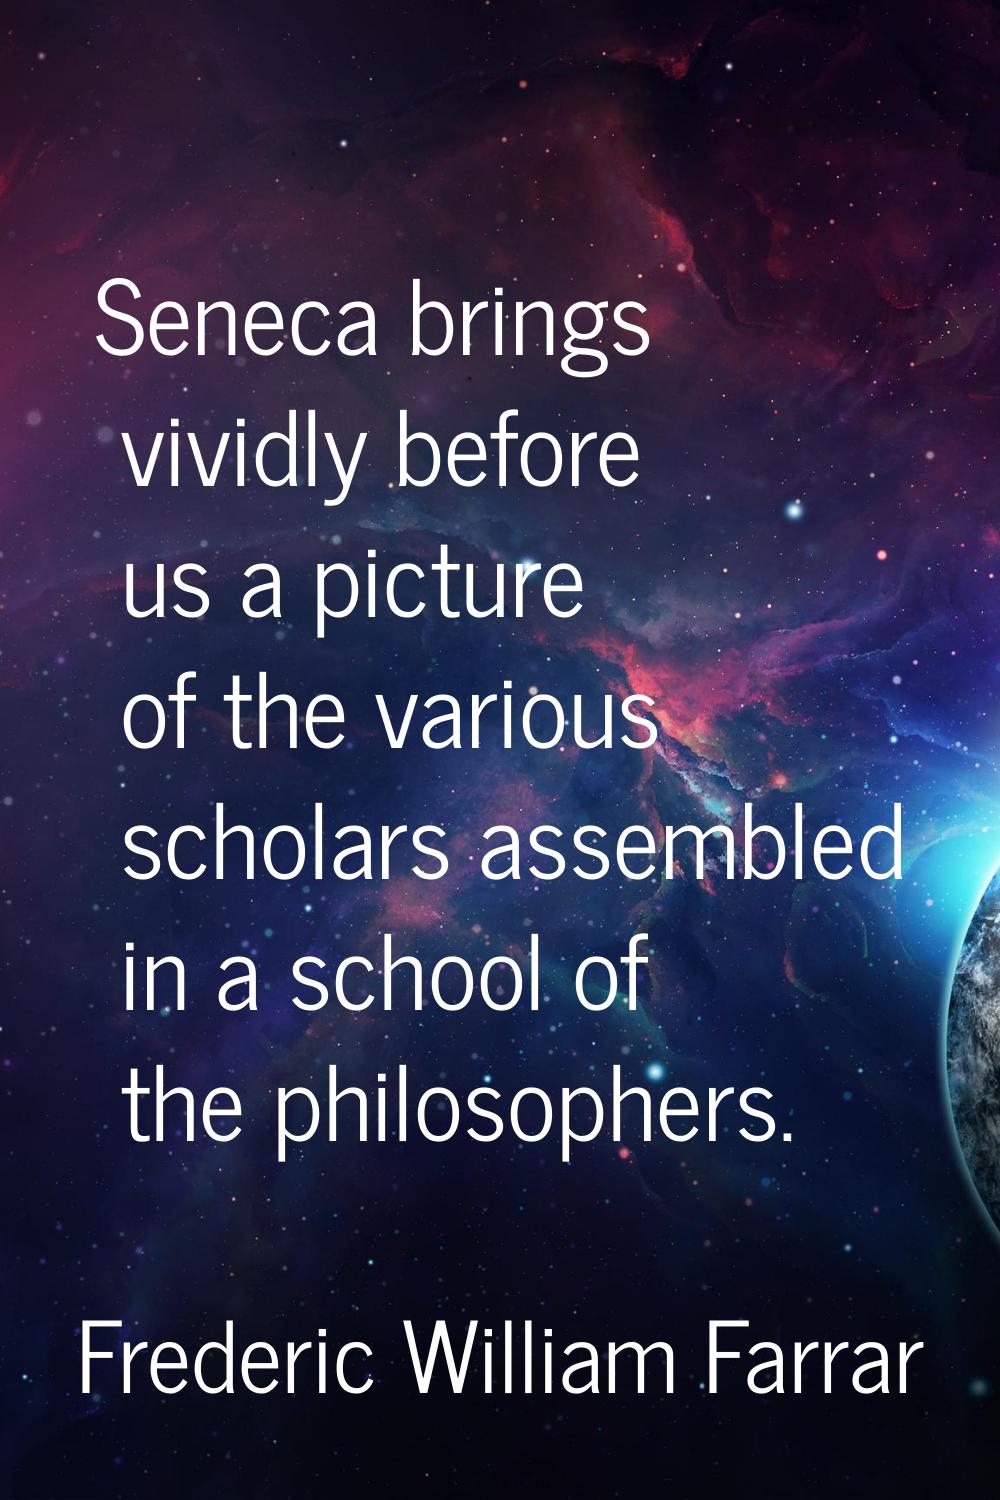 Seneca brings vividly before us a picture of the various scholars assembled in a school of the phil